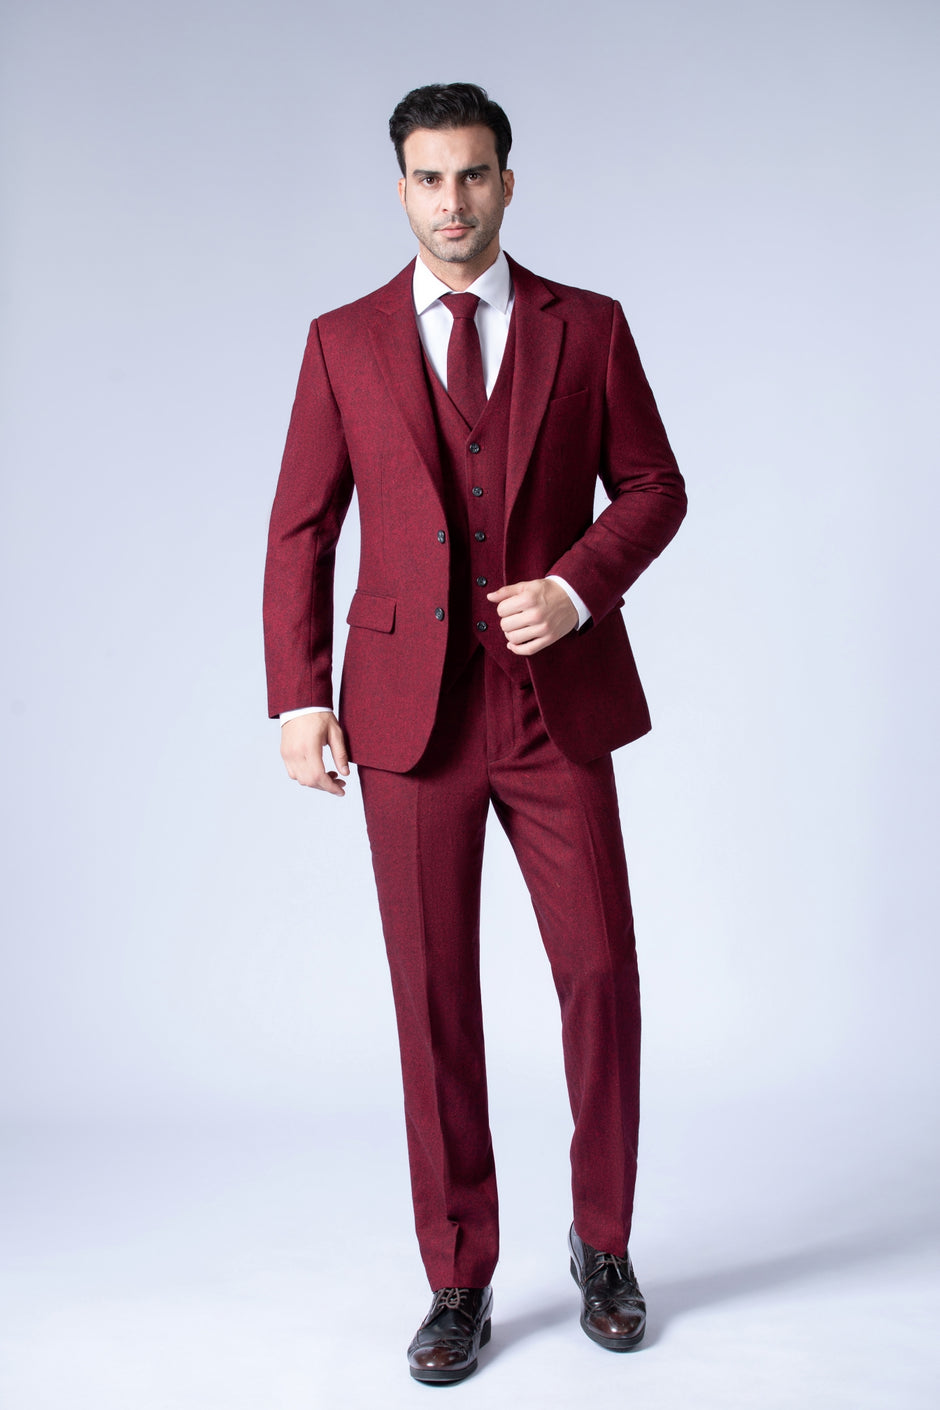 3 Piece and 2 Piece Suits - Wedding or Casual – Empire Outlet